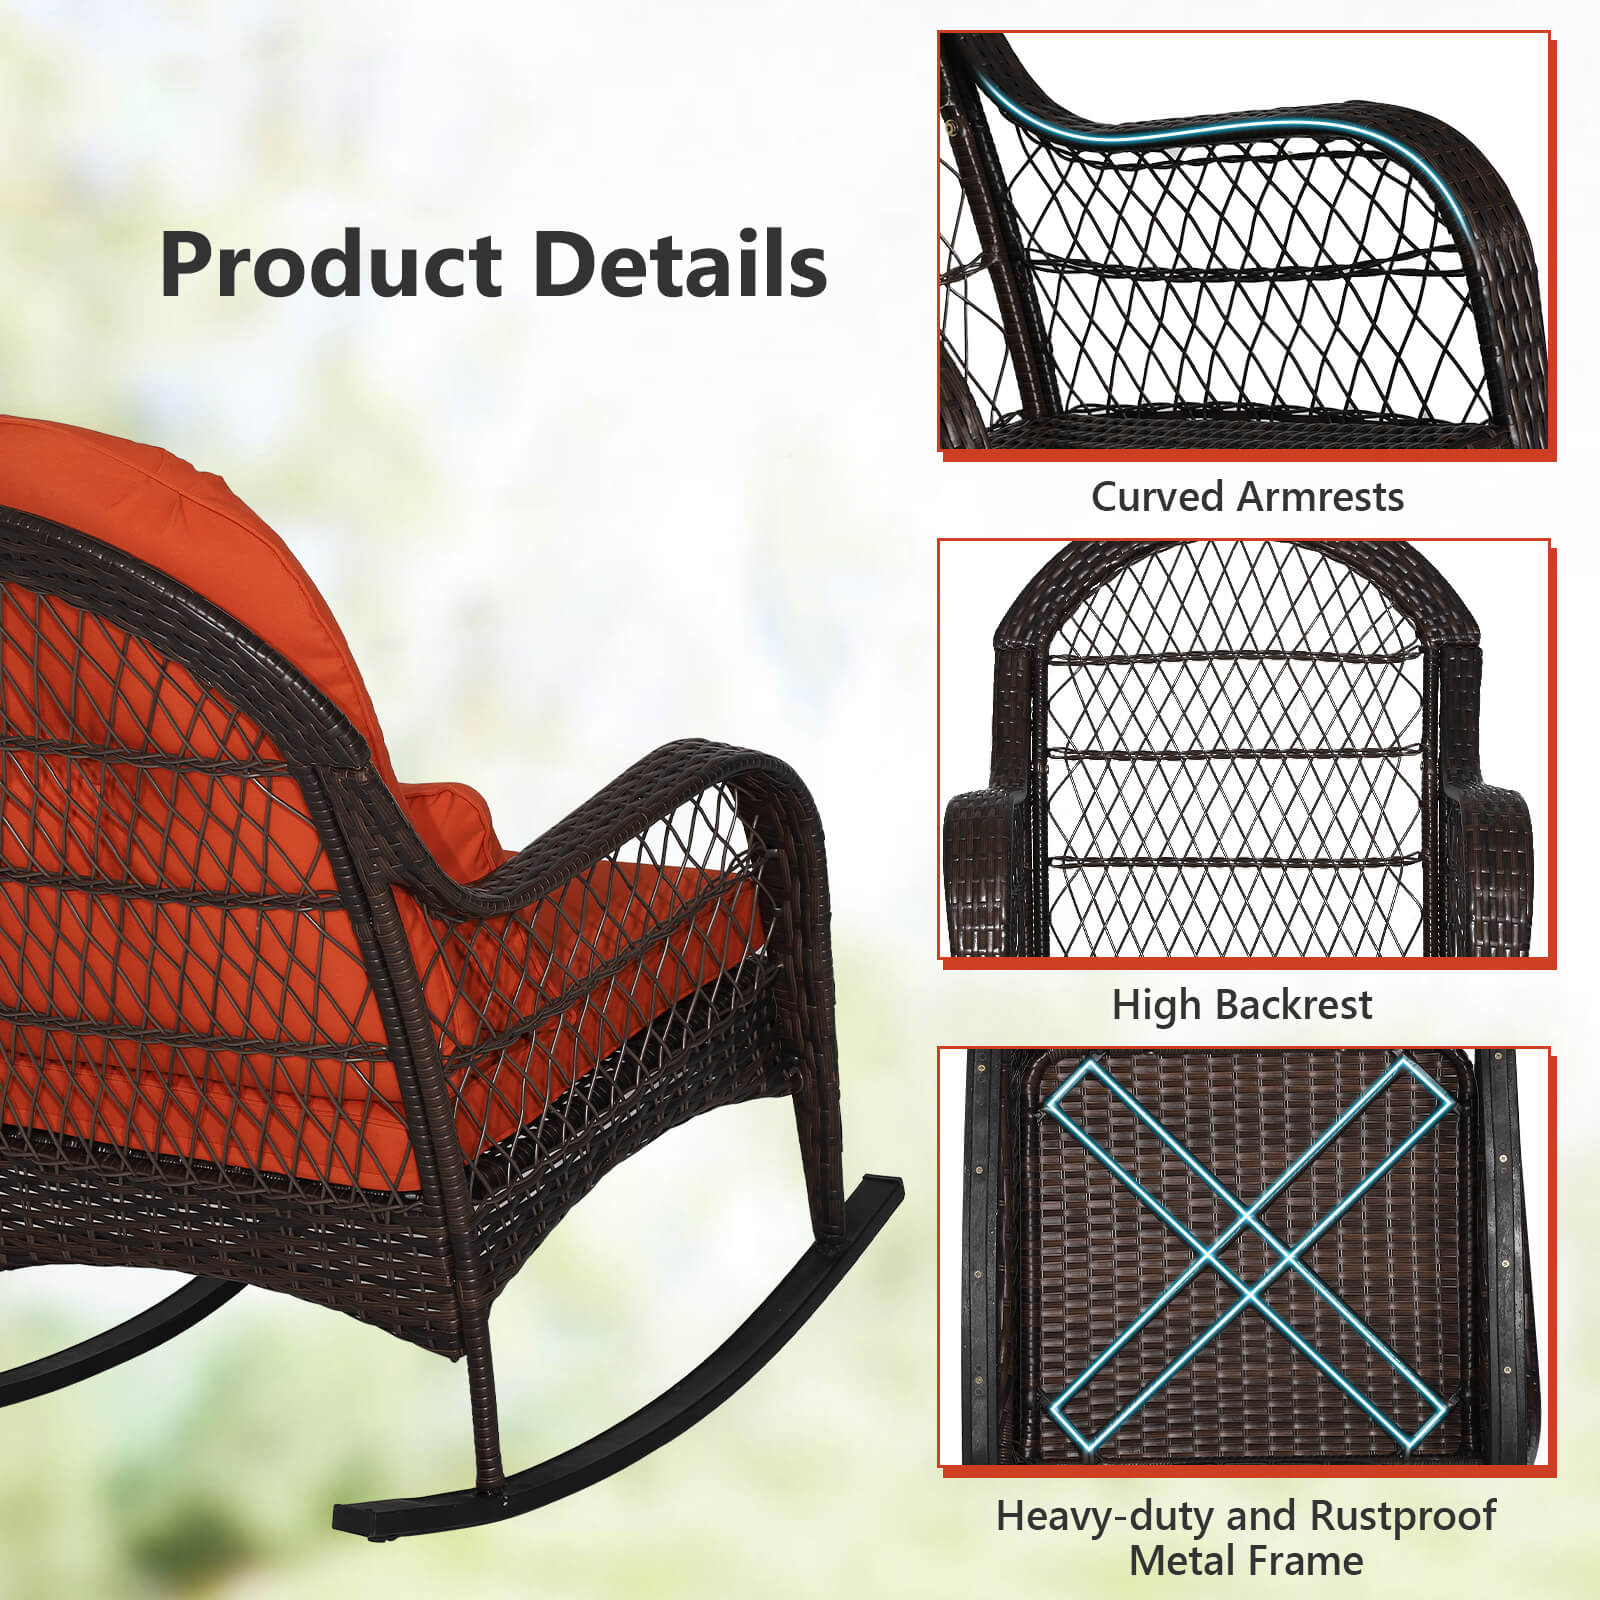 Details_of_the_Patio_Rocking_Chair-9.jpg